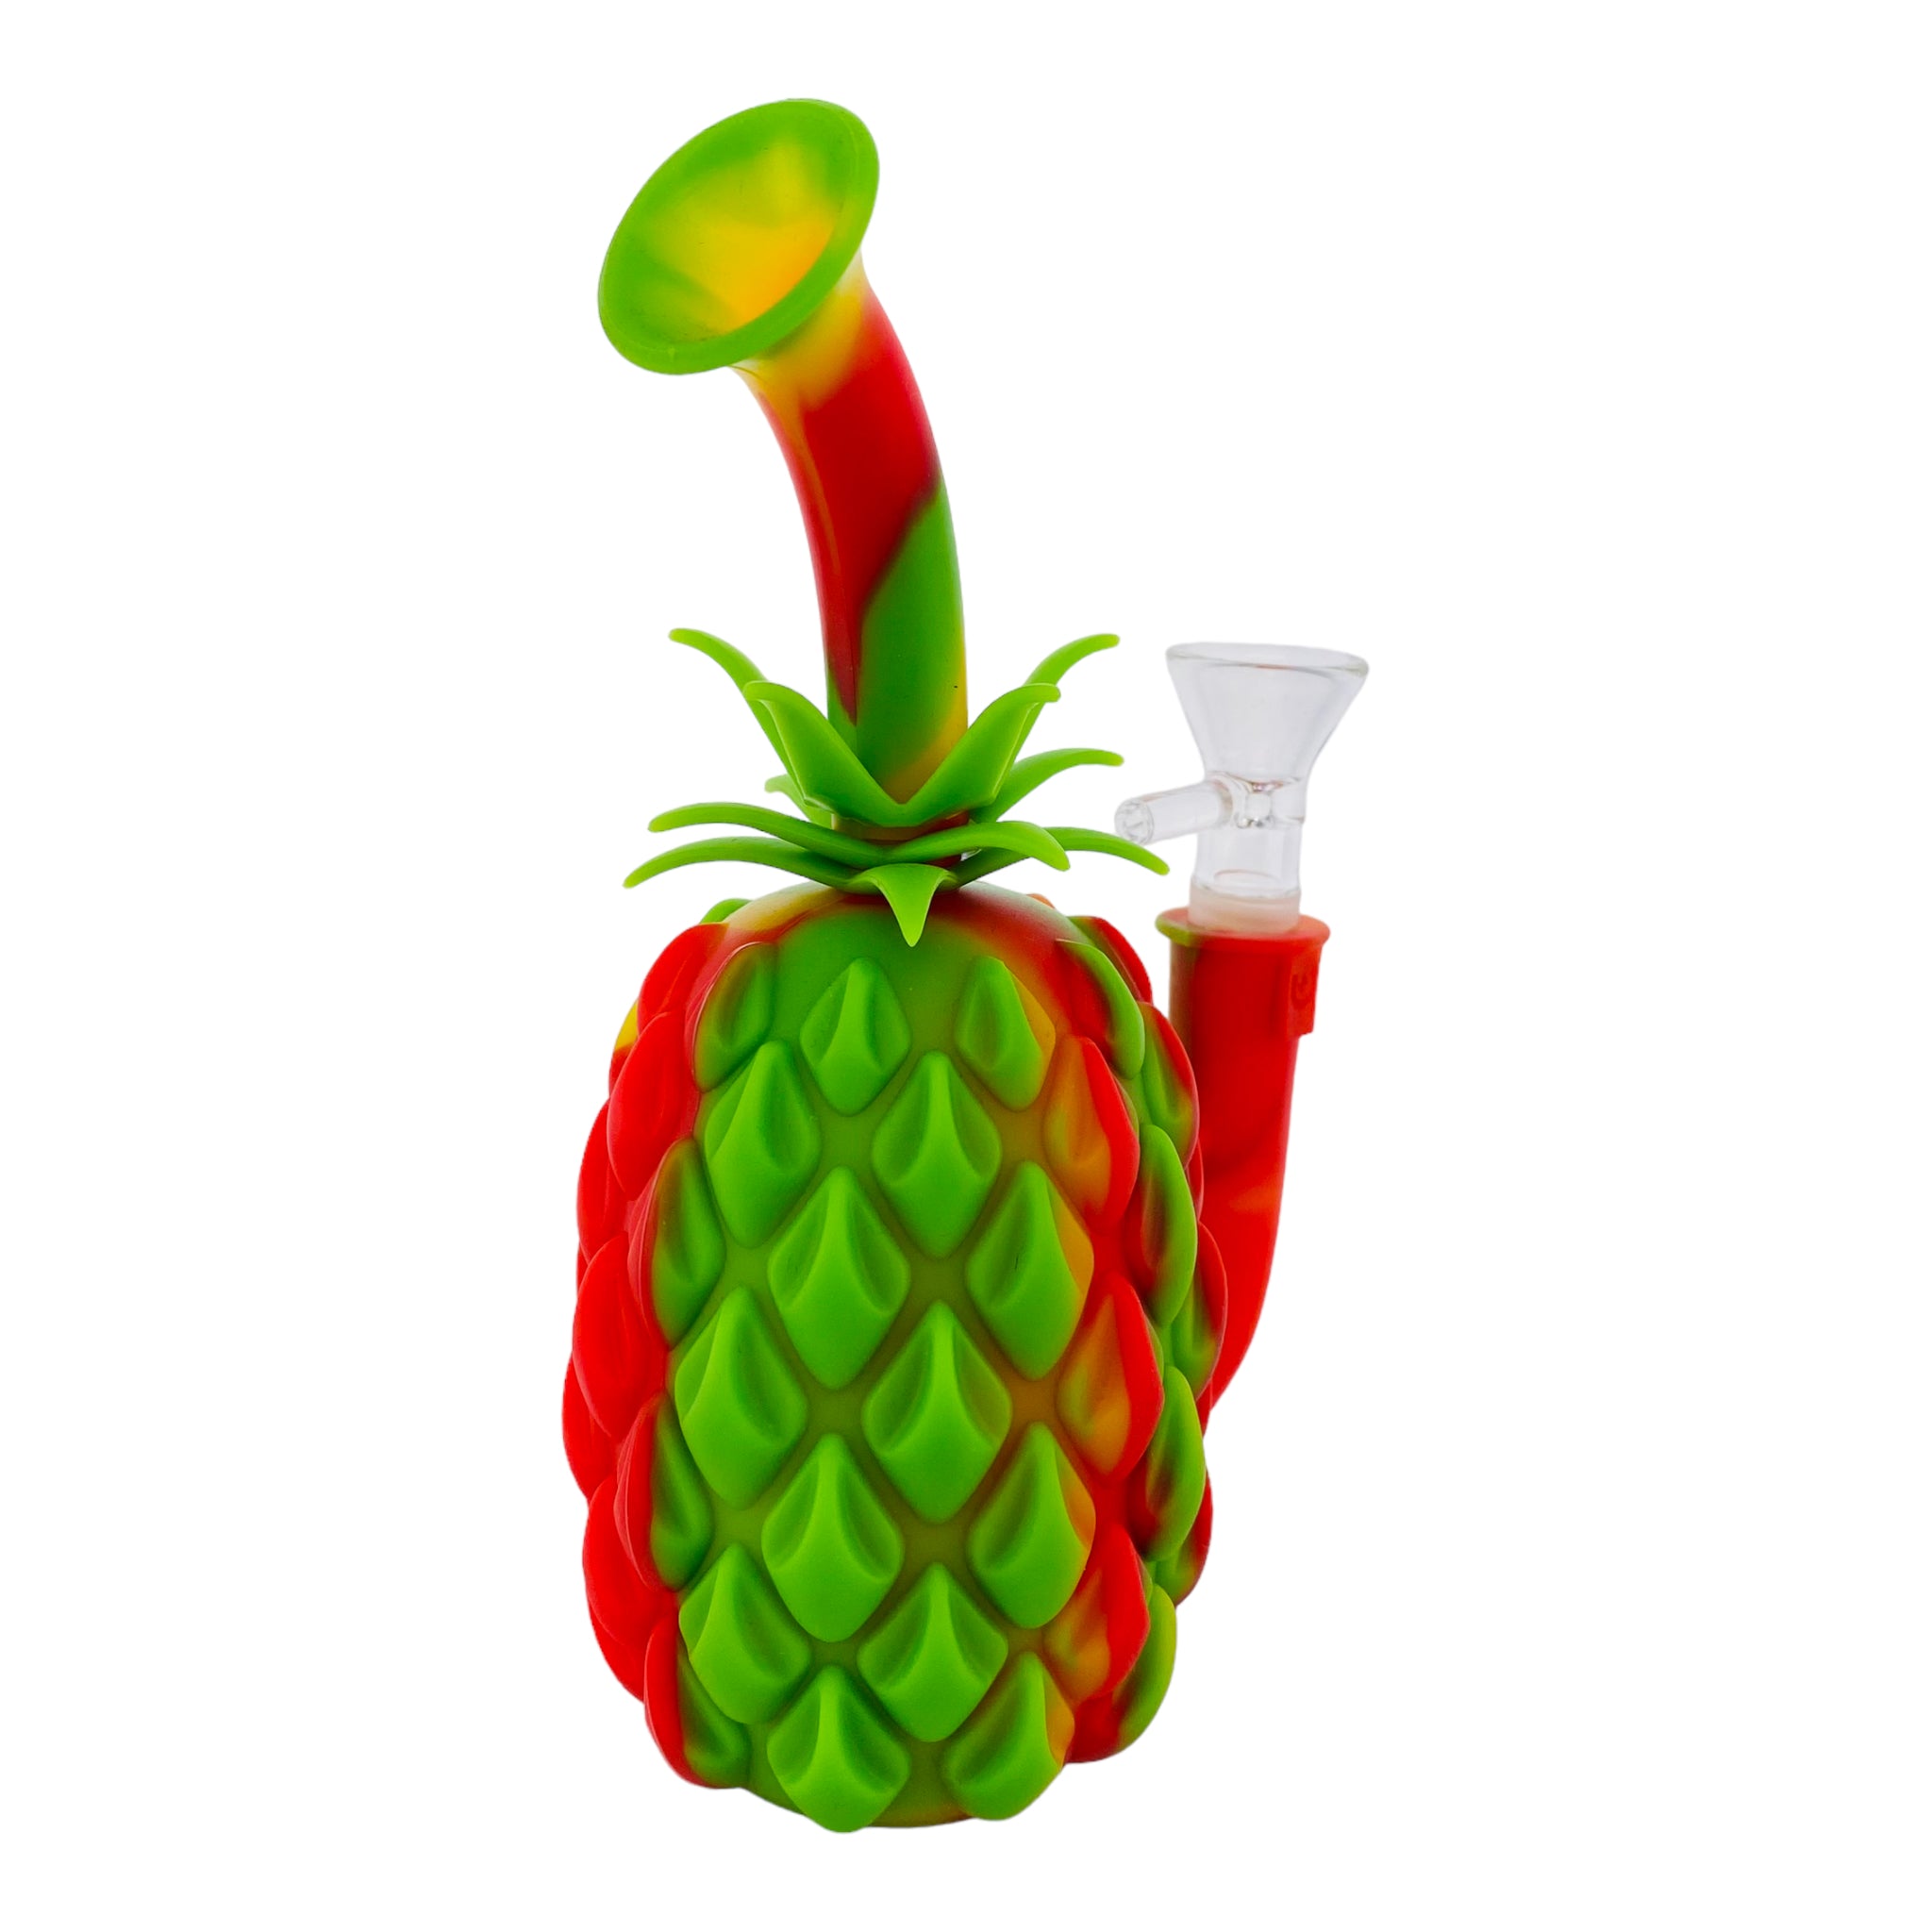 Rasta Pineapple Express Silicone Bubbler Bong With Magnetic Tool Holder